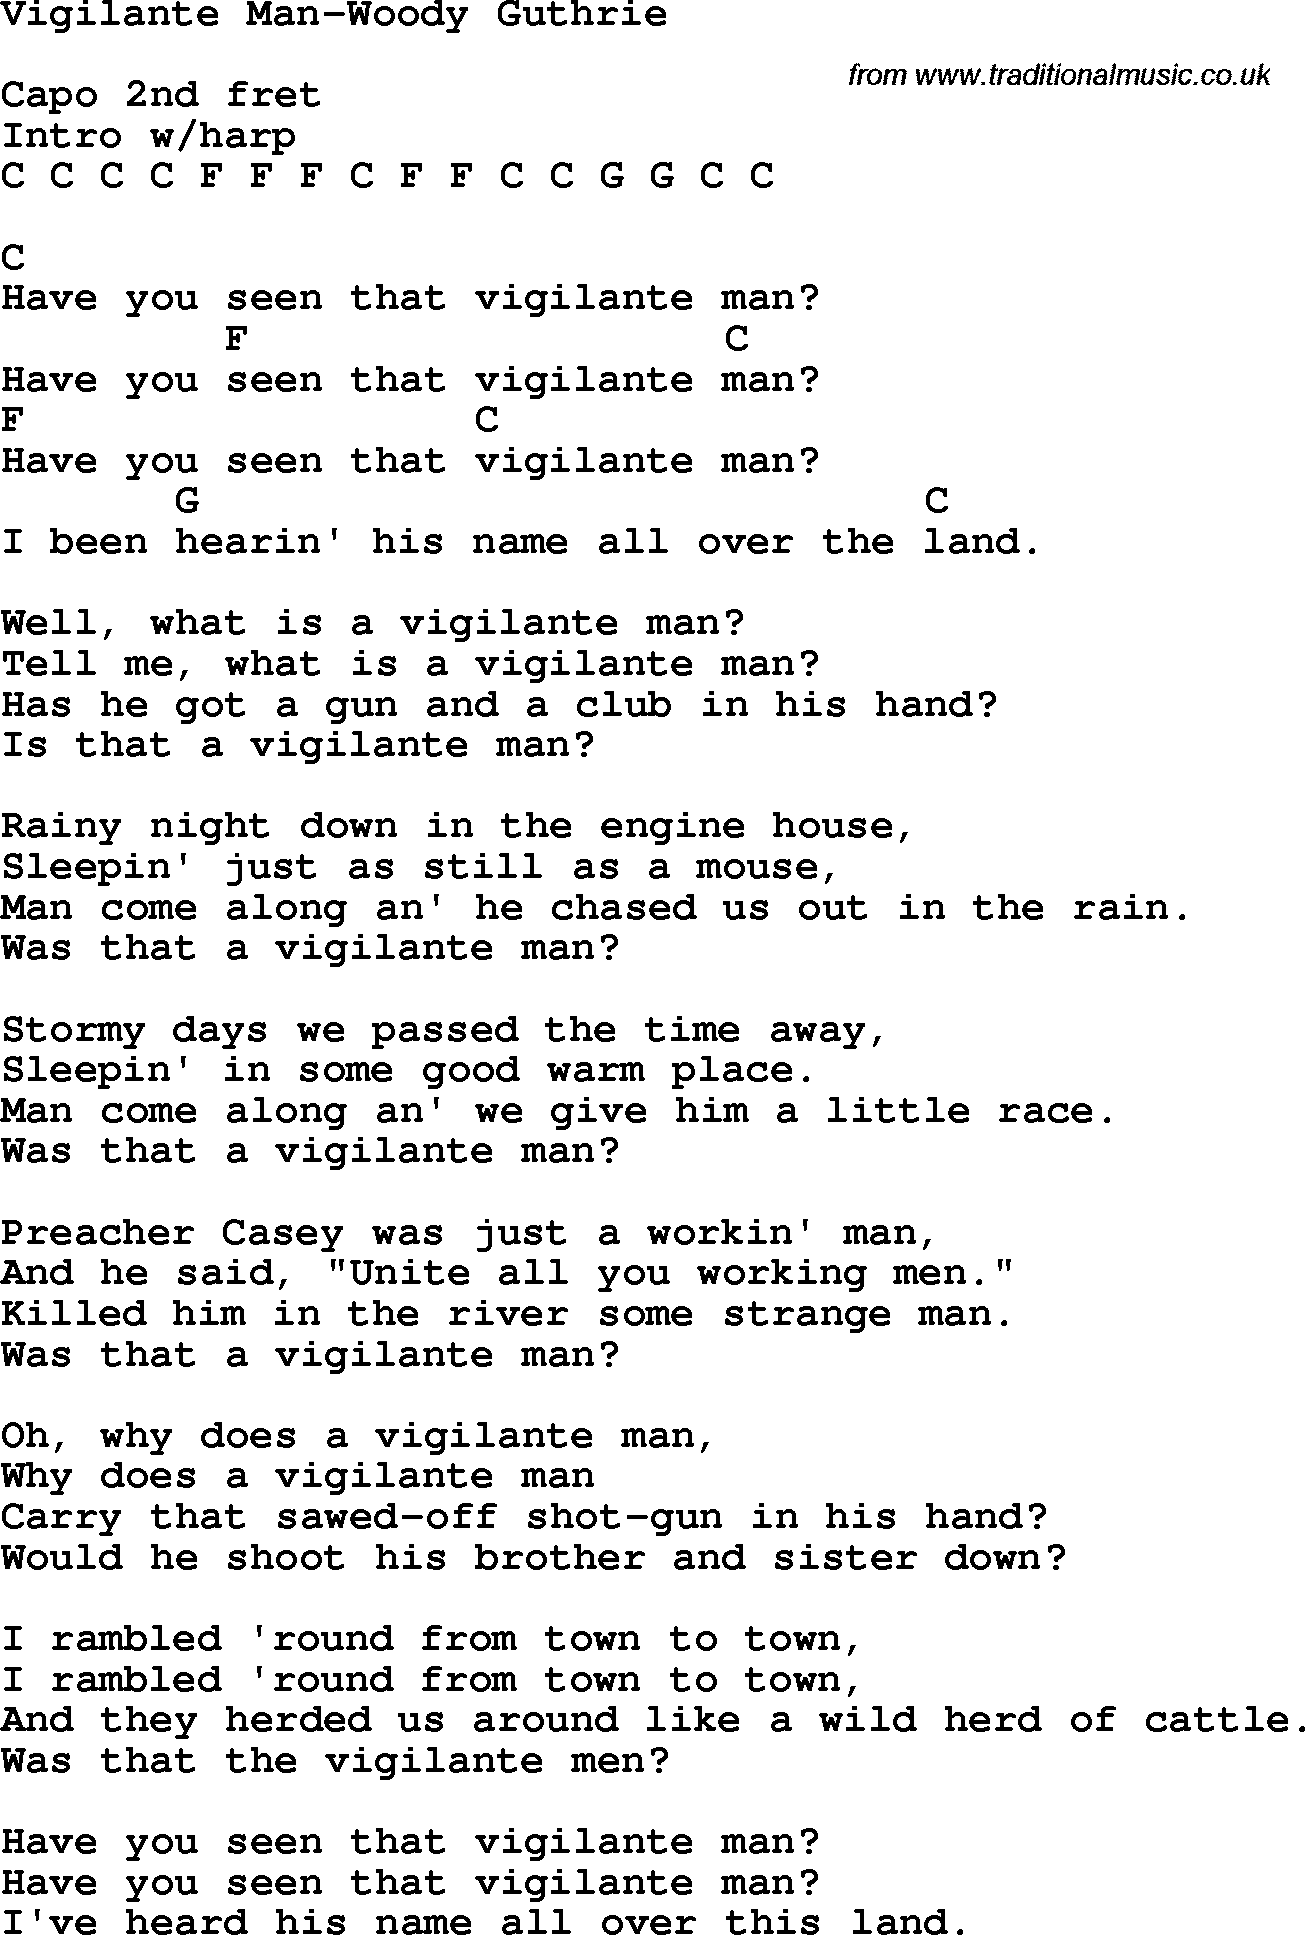 Protest Song Vigilante Man-Woody Guthrie lyrics and chords